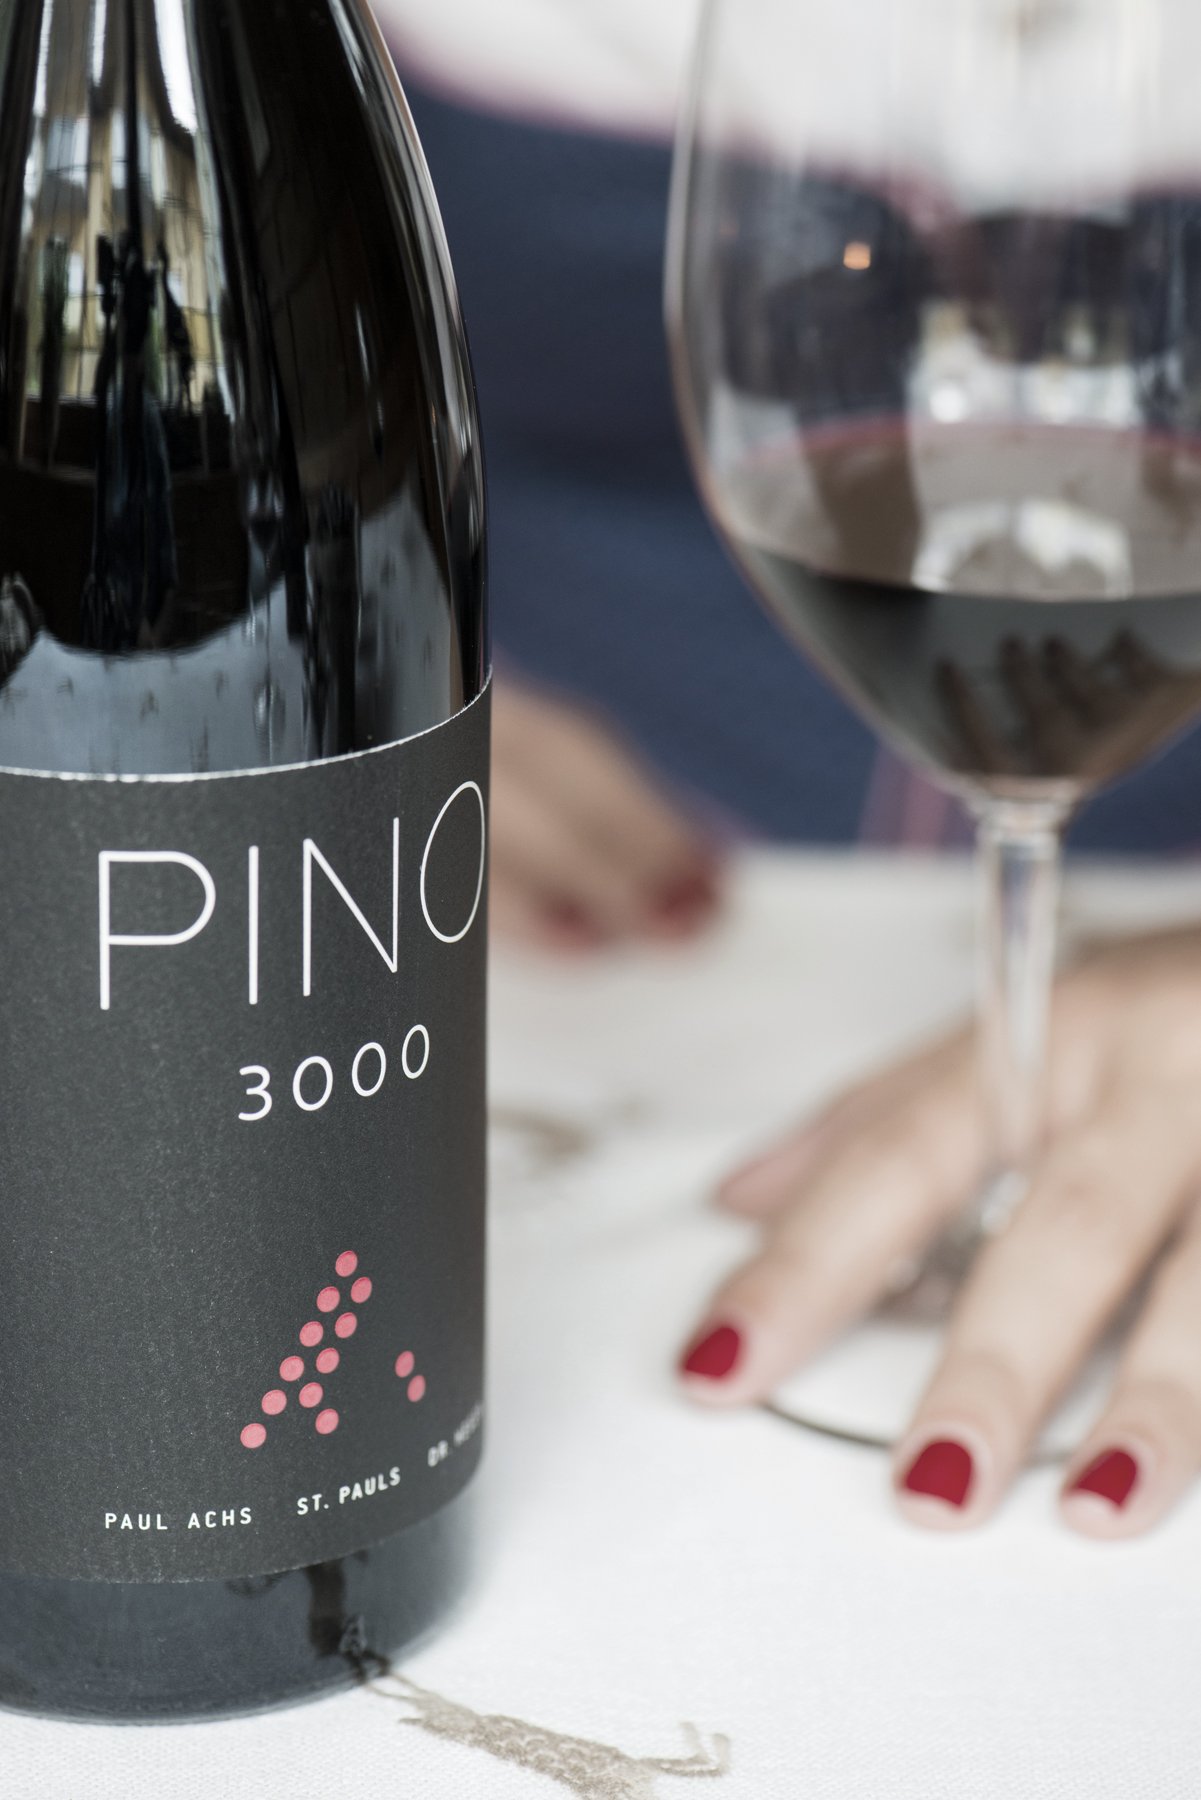 PINO 3000 - the only three-country blend in the world